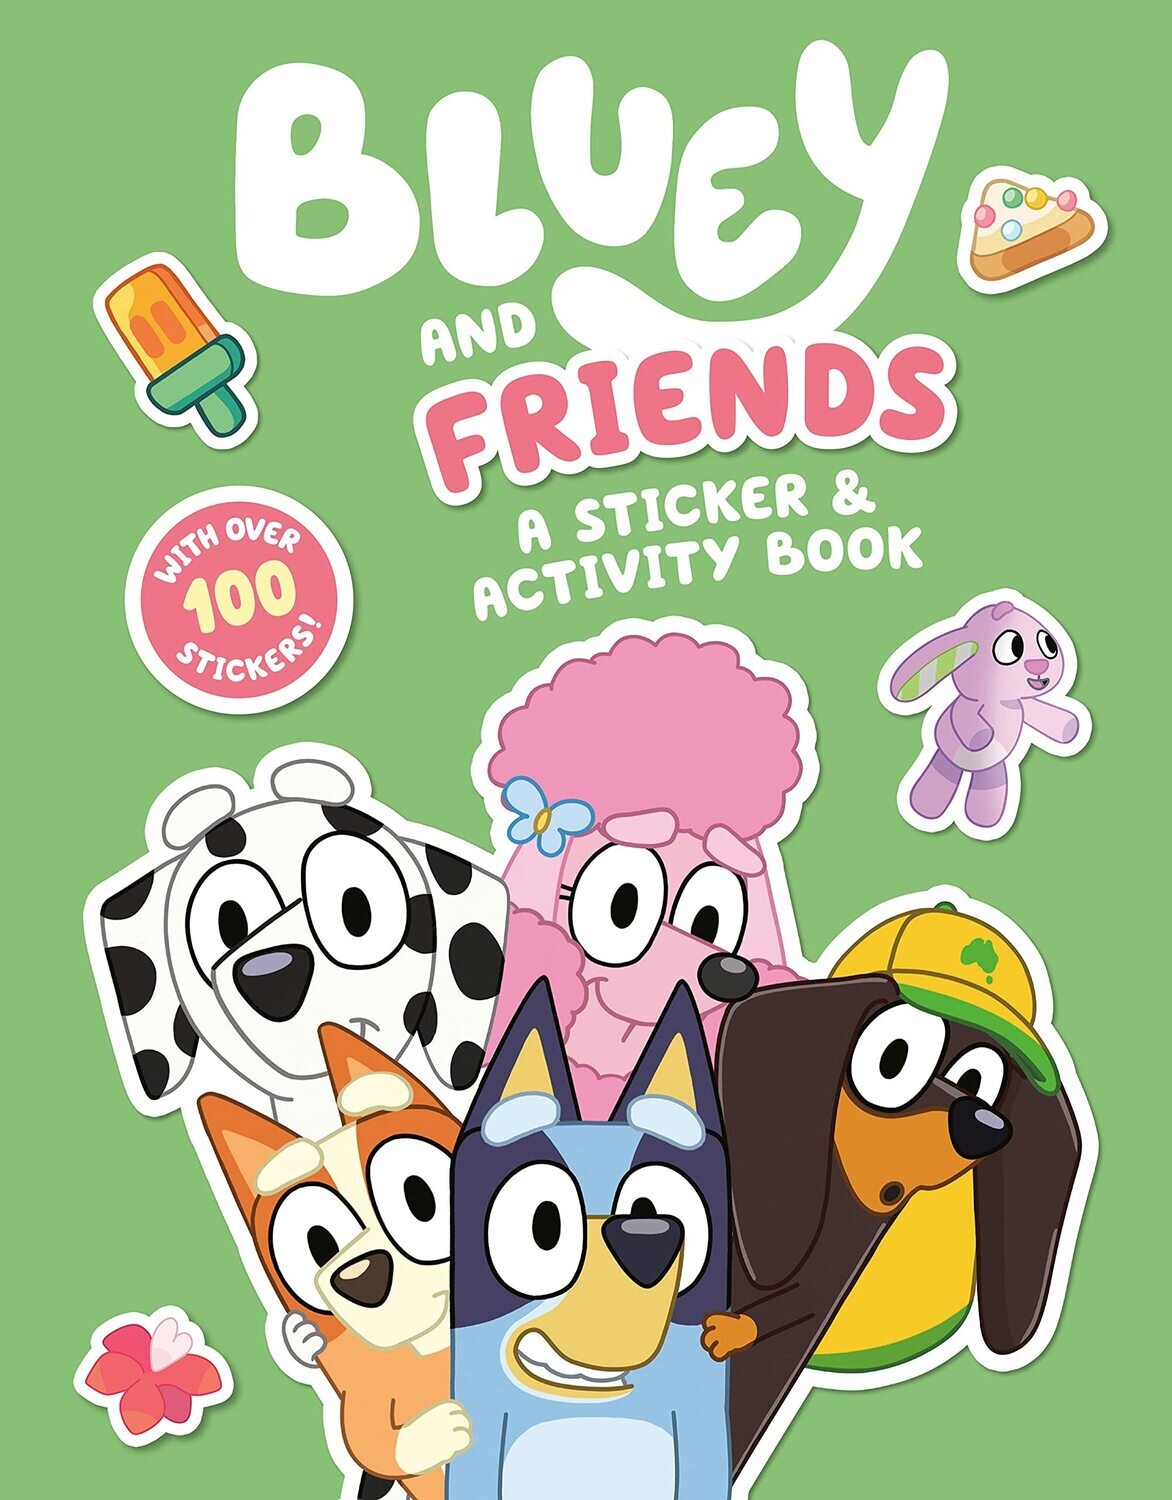 Bluey Bluey and Friends: A Sticker &amp; Activity Book